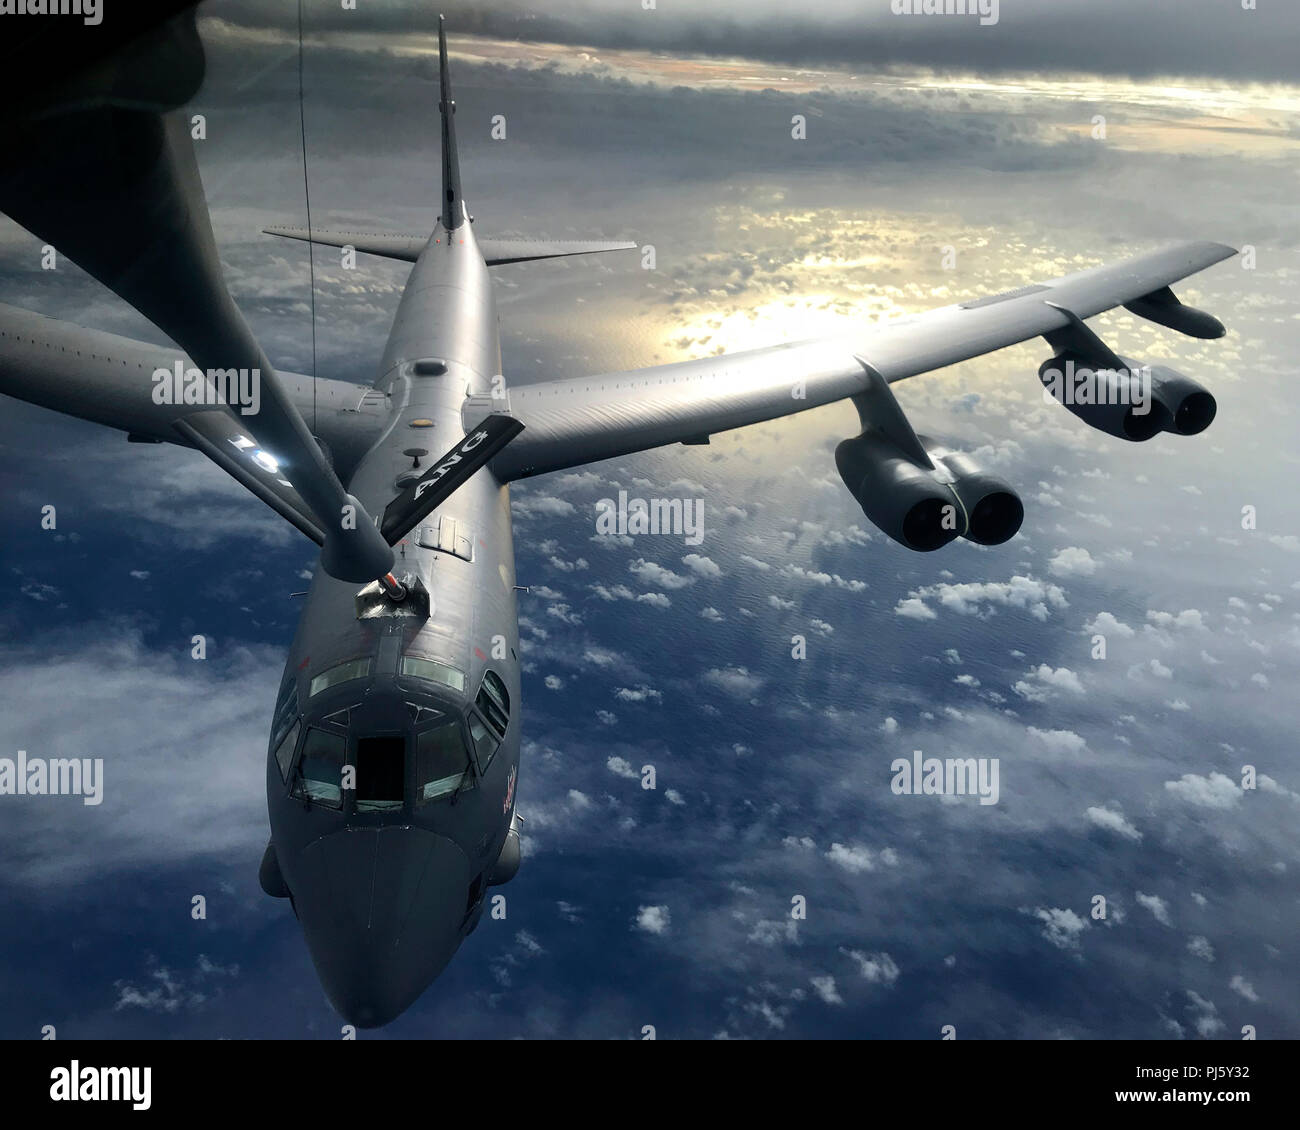 A U.S. Air Force KC-135 Stratotanker, assigned to the 506th Expeditionary Air Refueling Squadron, refuels a B-52 Stratofortress over the Indian Ocean June 10, 2018. The 506th EARS is a permanently assigned unit comprised of Air National Guard, Reserve and Active Duty KC-135 Stratotanker units from across the states. (U.S. Air Force photo by Airman 1st Class Gerald R. Willis) Stock Photo